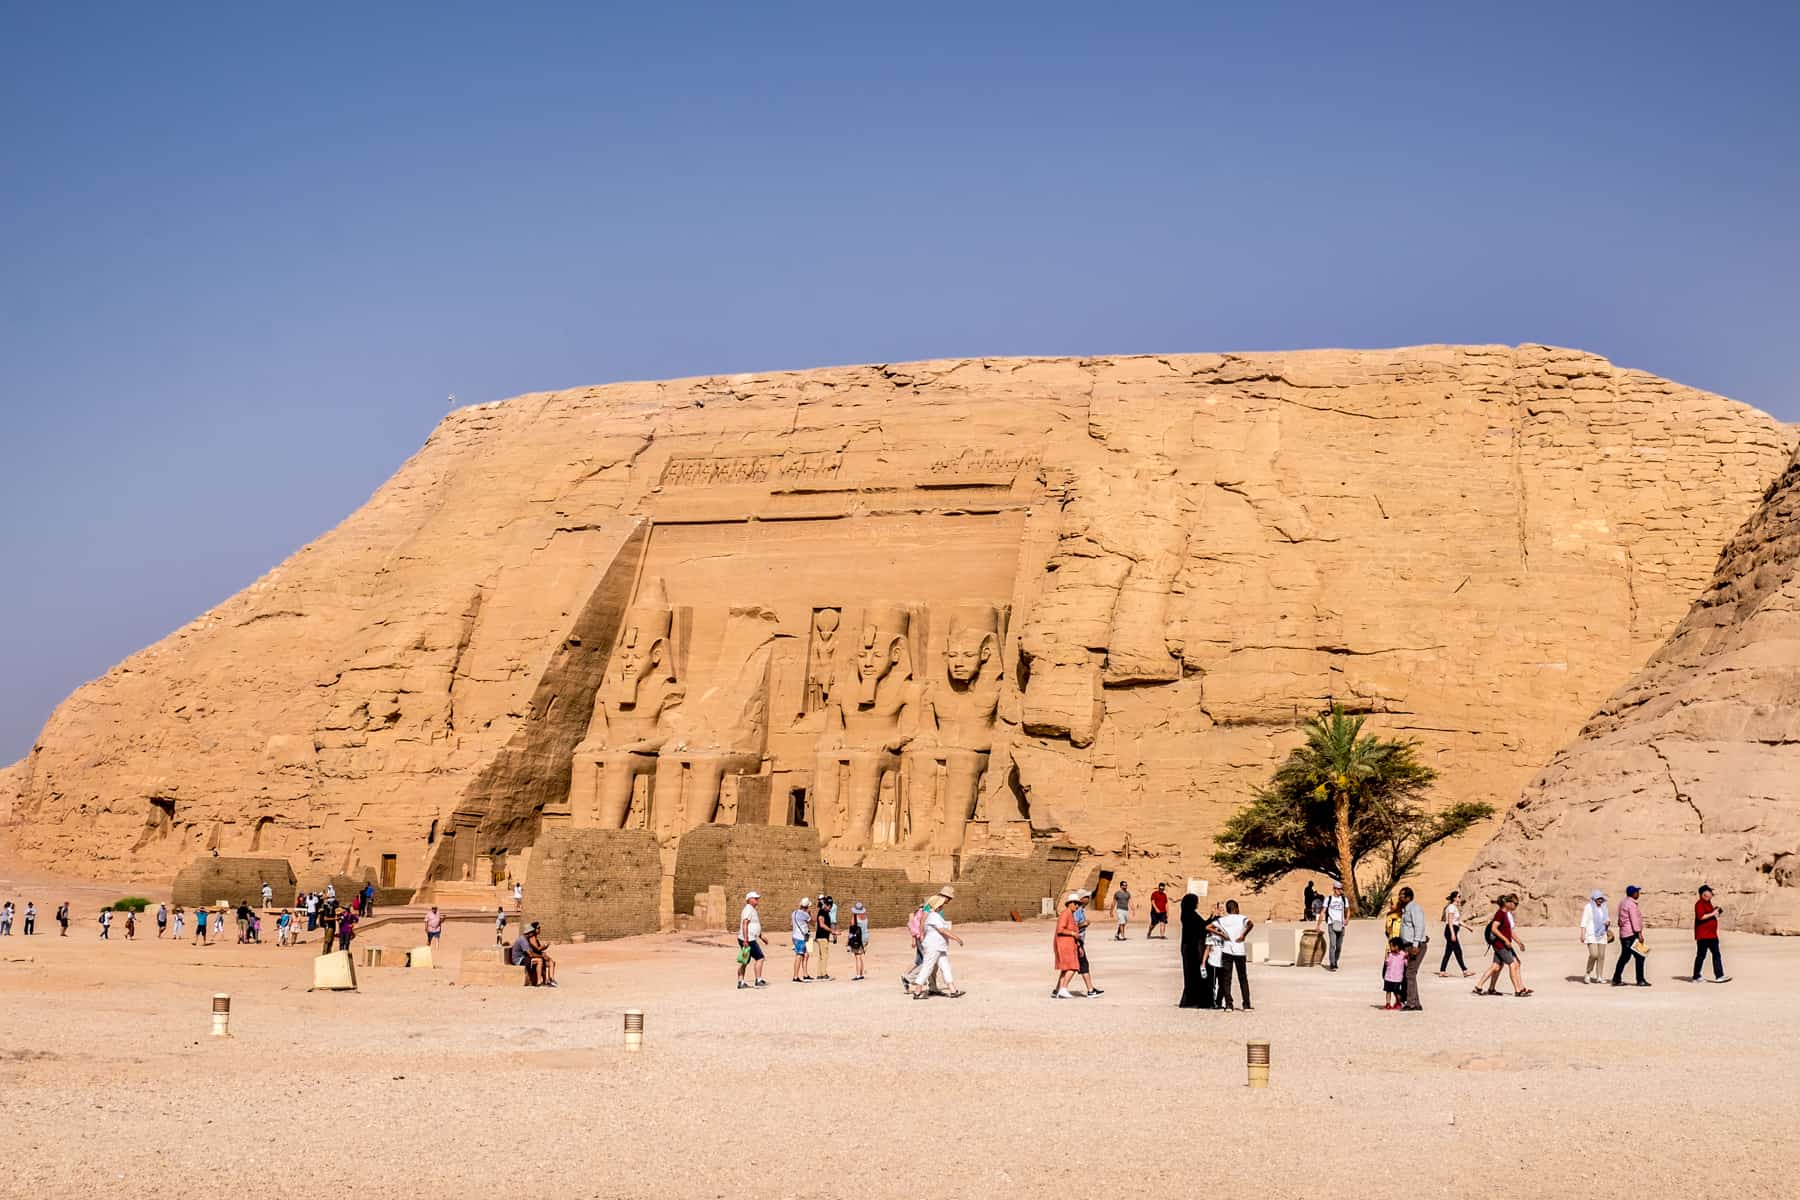 scattering of tourists look tiny next to the large mountain carved temple of Abu Simbel in Egypt that glows in the high sun